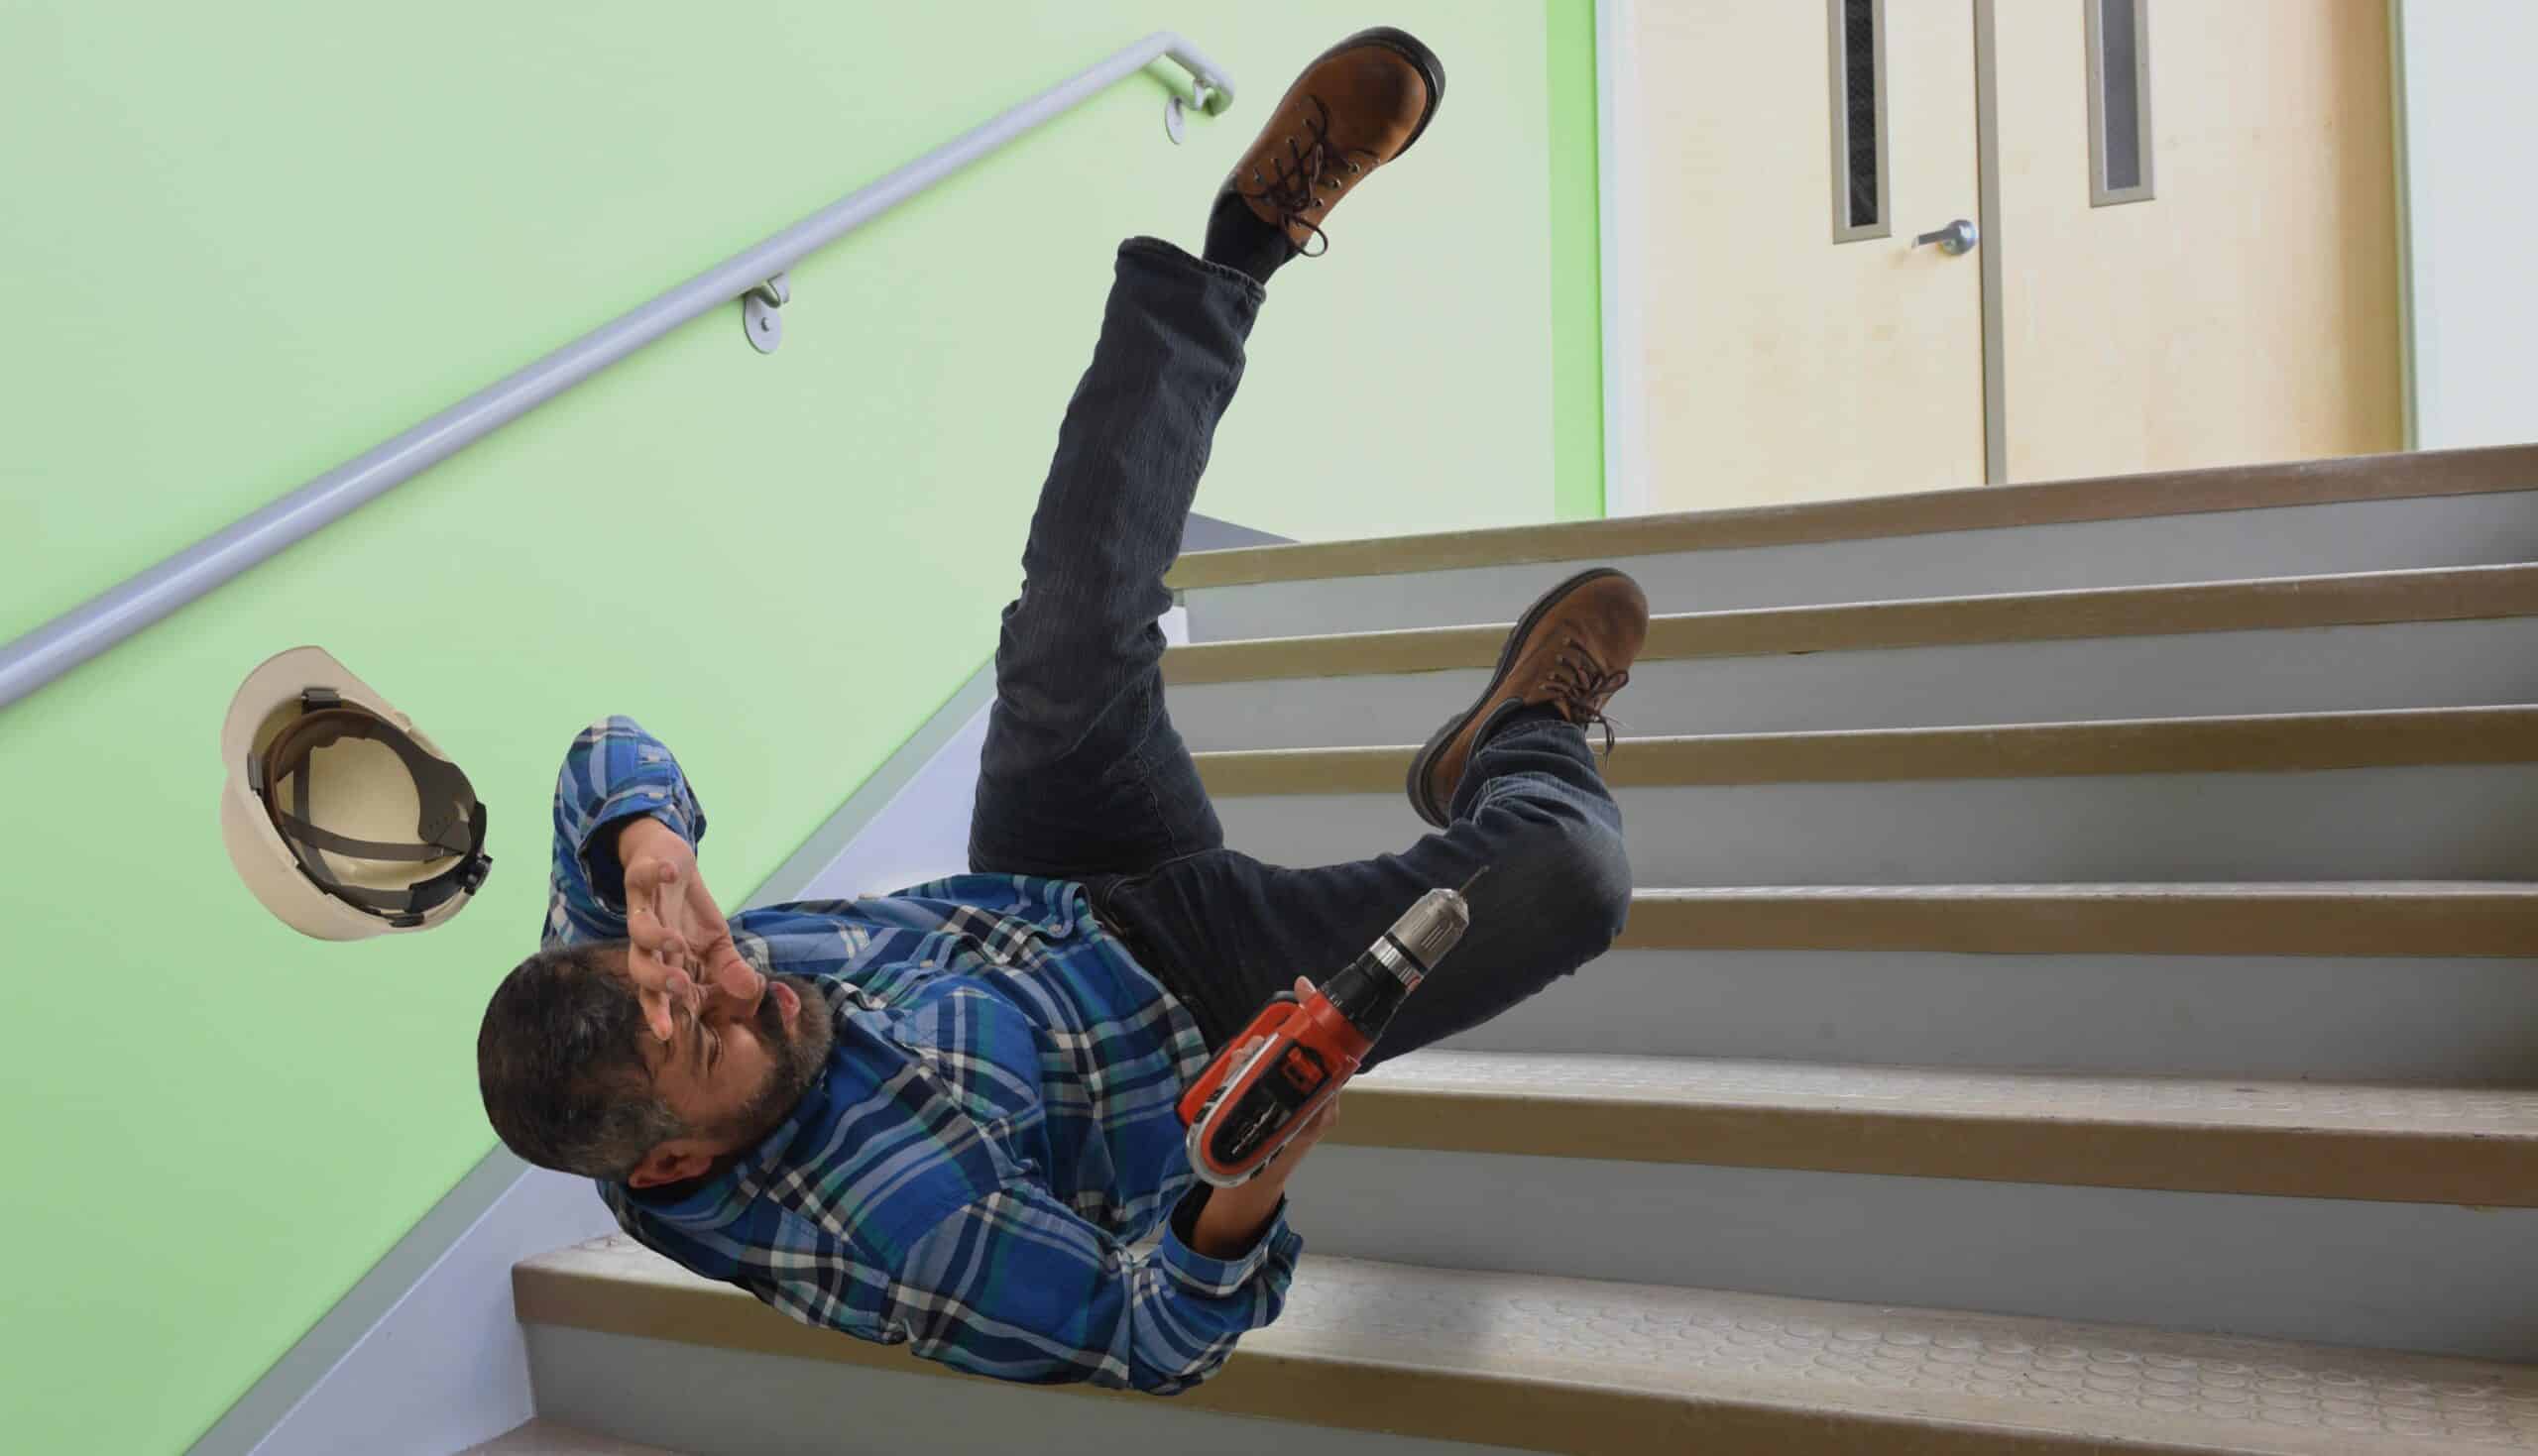 How Can You Prevent Slips, Trips and Falls In The Workplace?